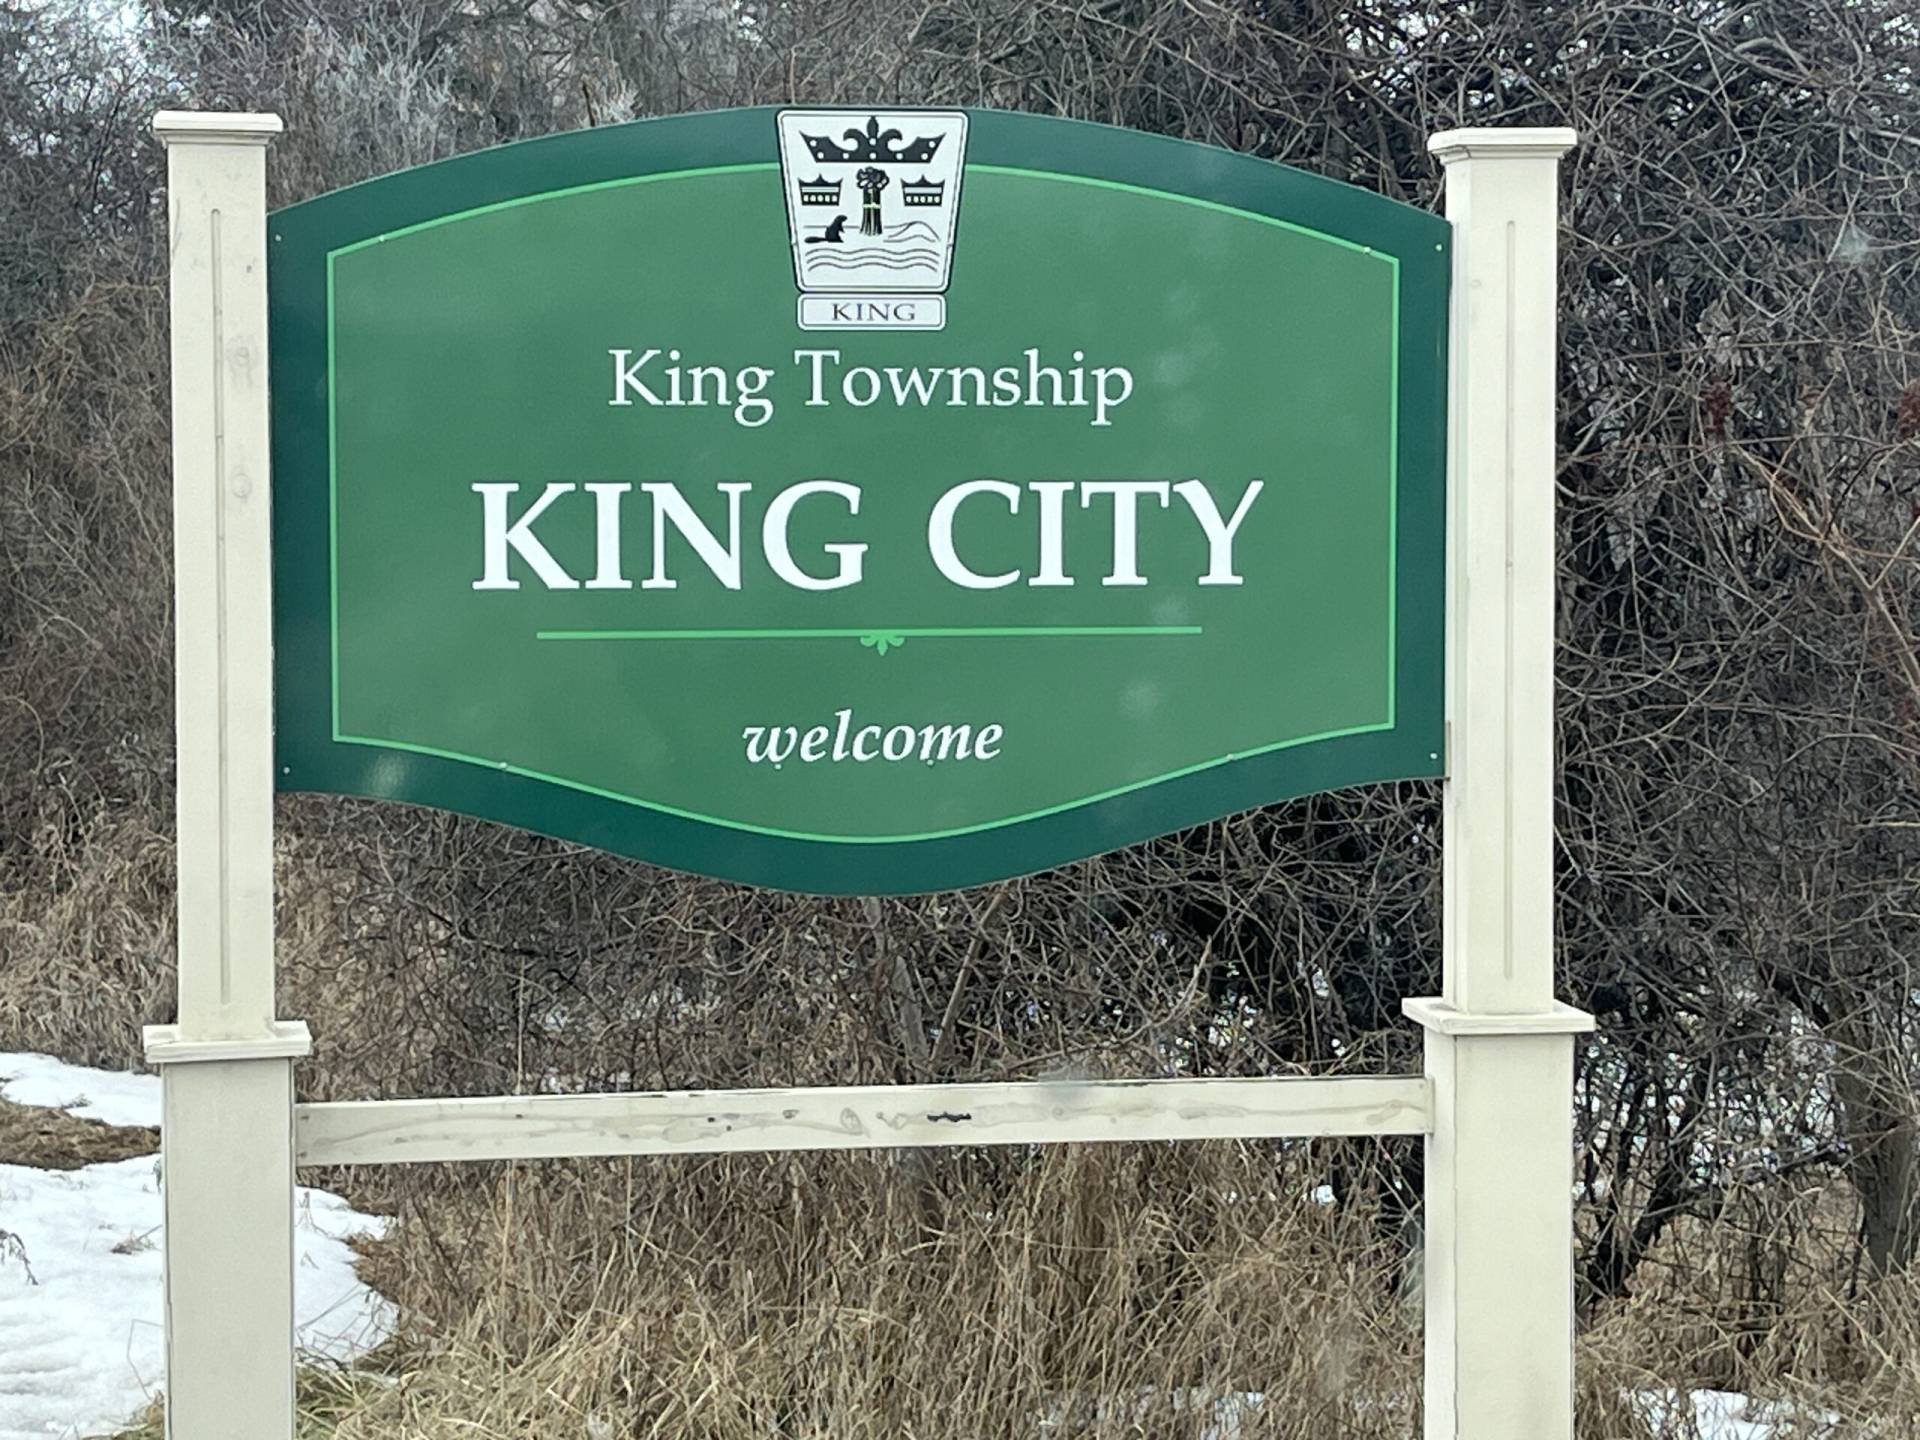 King city, township of King sign board